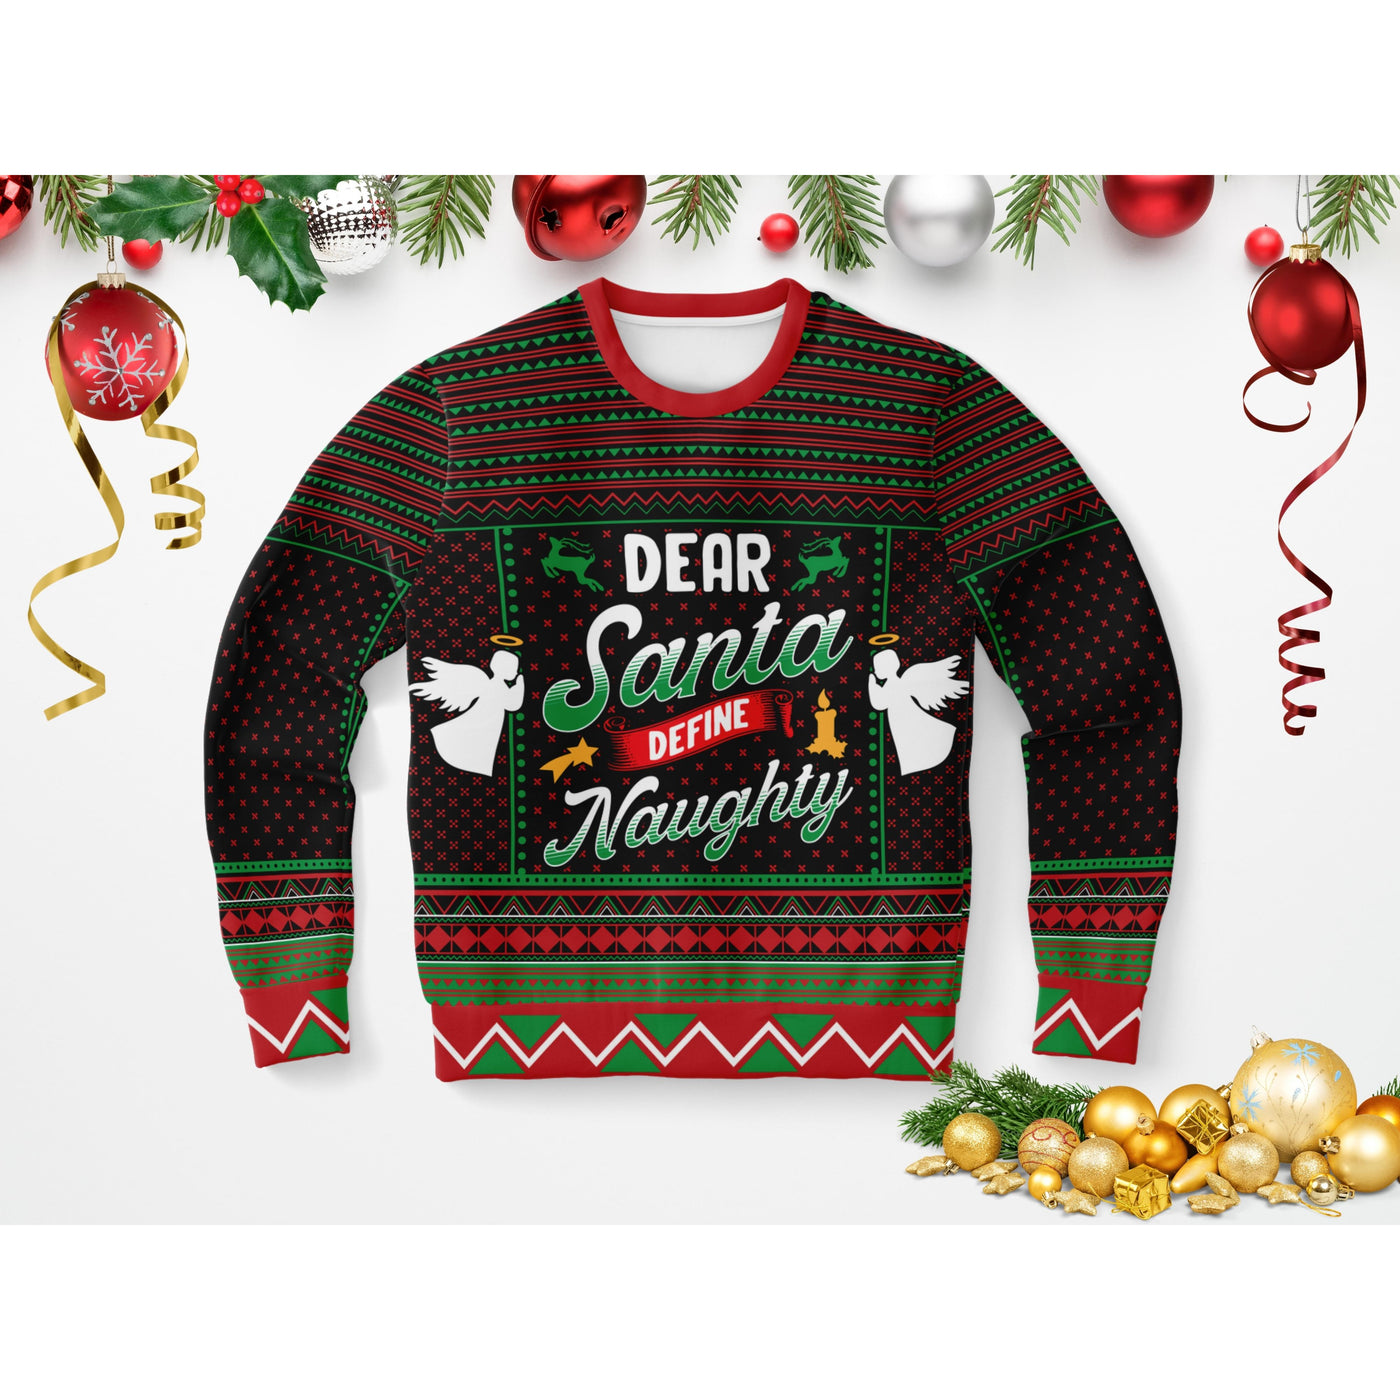 Lavender Define Naughty | Ugly Xmas Sweater